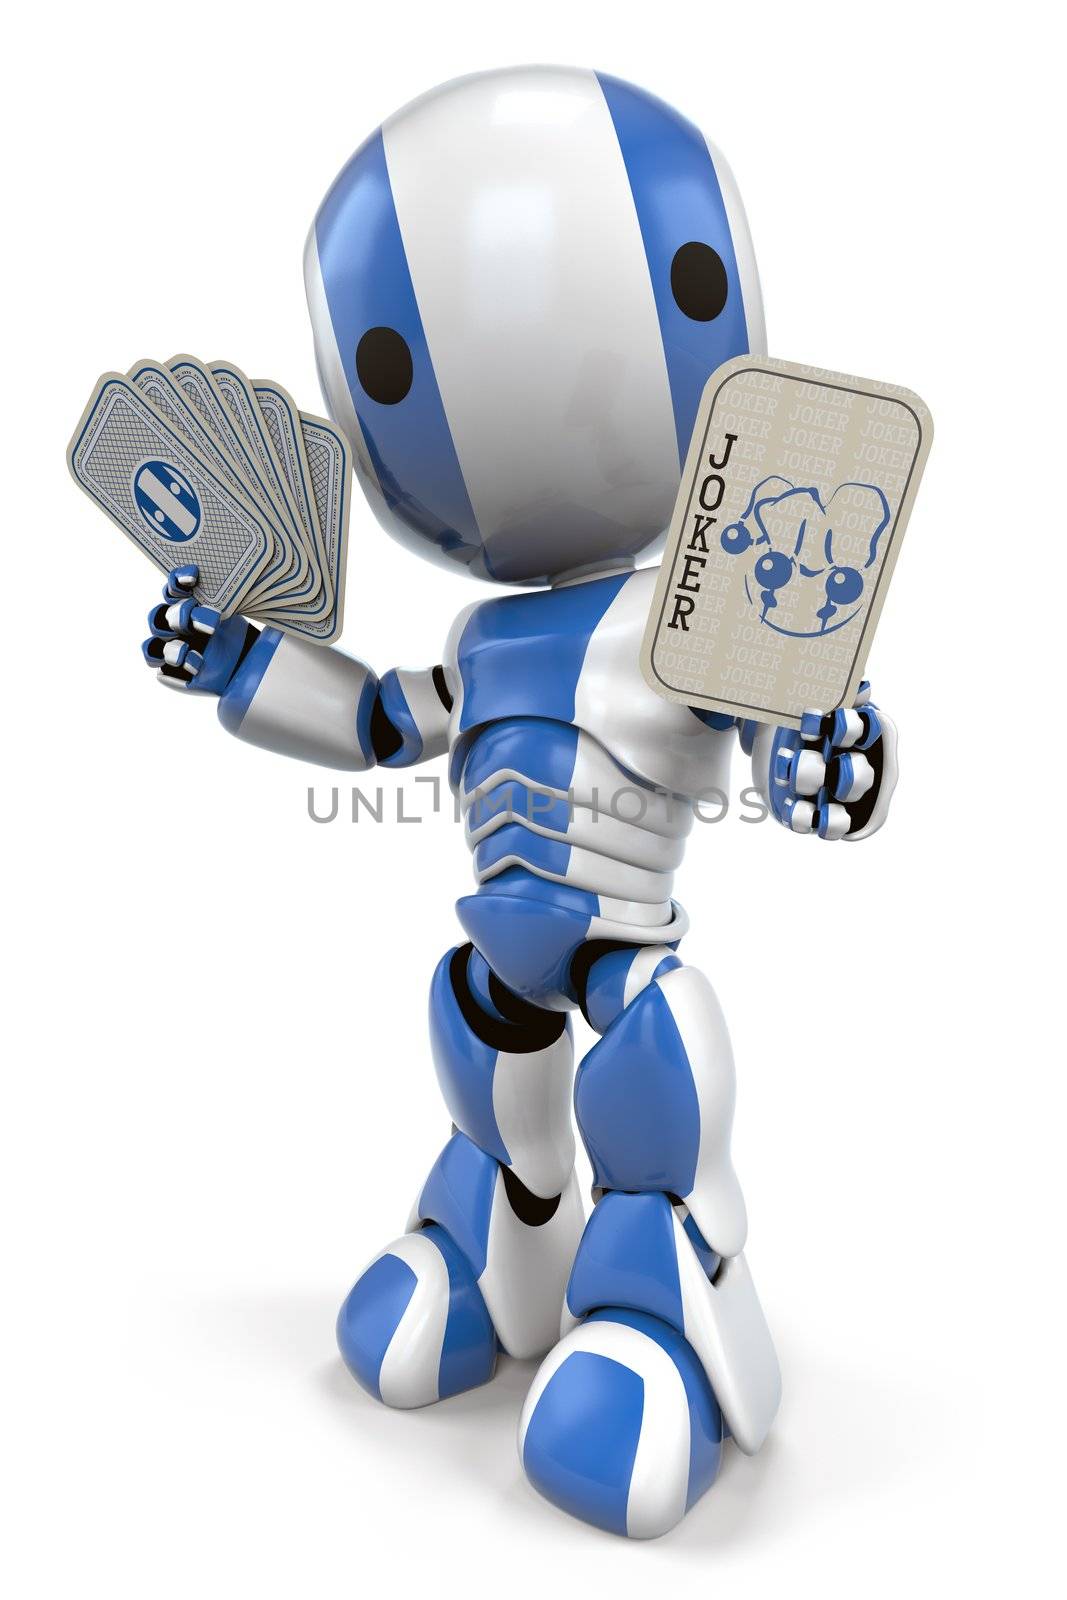 A blue robot holding up a joker card. With his advanced probability and chance assessment programming, you just can't beat him!